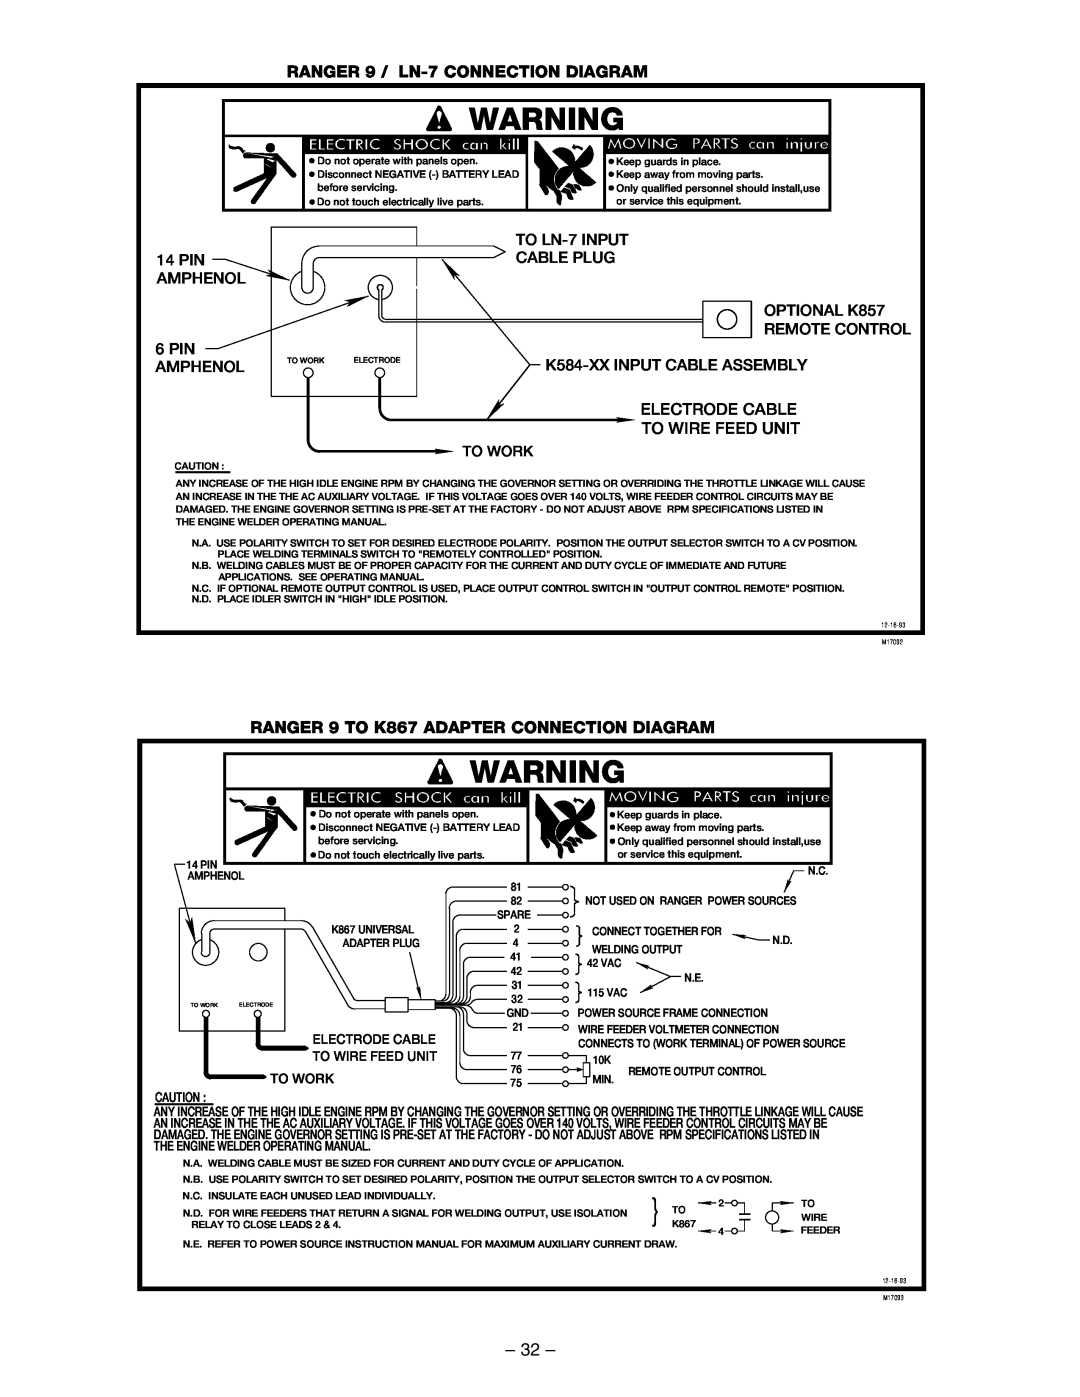 Lincoln Electric IM511-D manual Warnin G, RANGER 9 / LN-7 CONNECTION DIAGRAM, Electrode Cable To Wire Feed Unit, To Work 